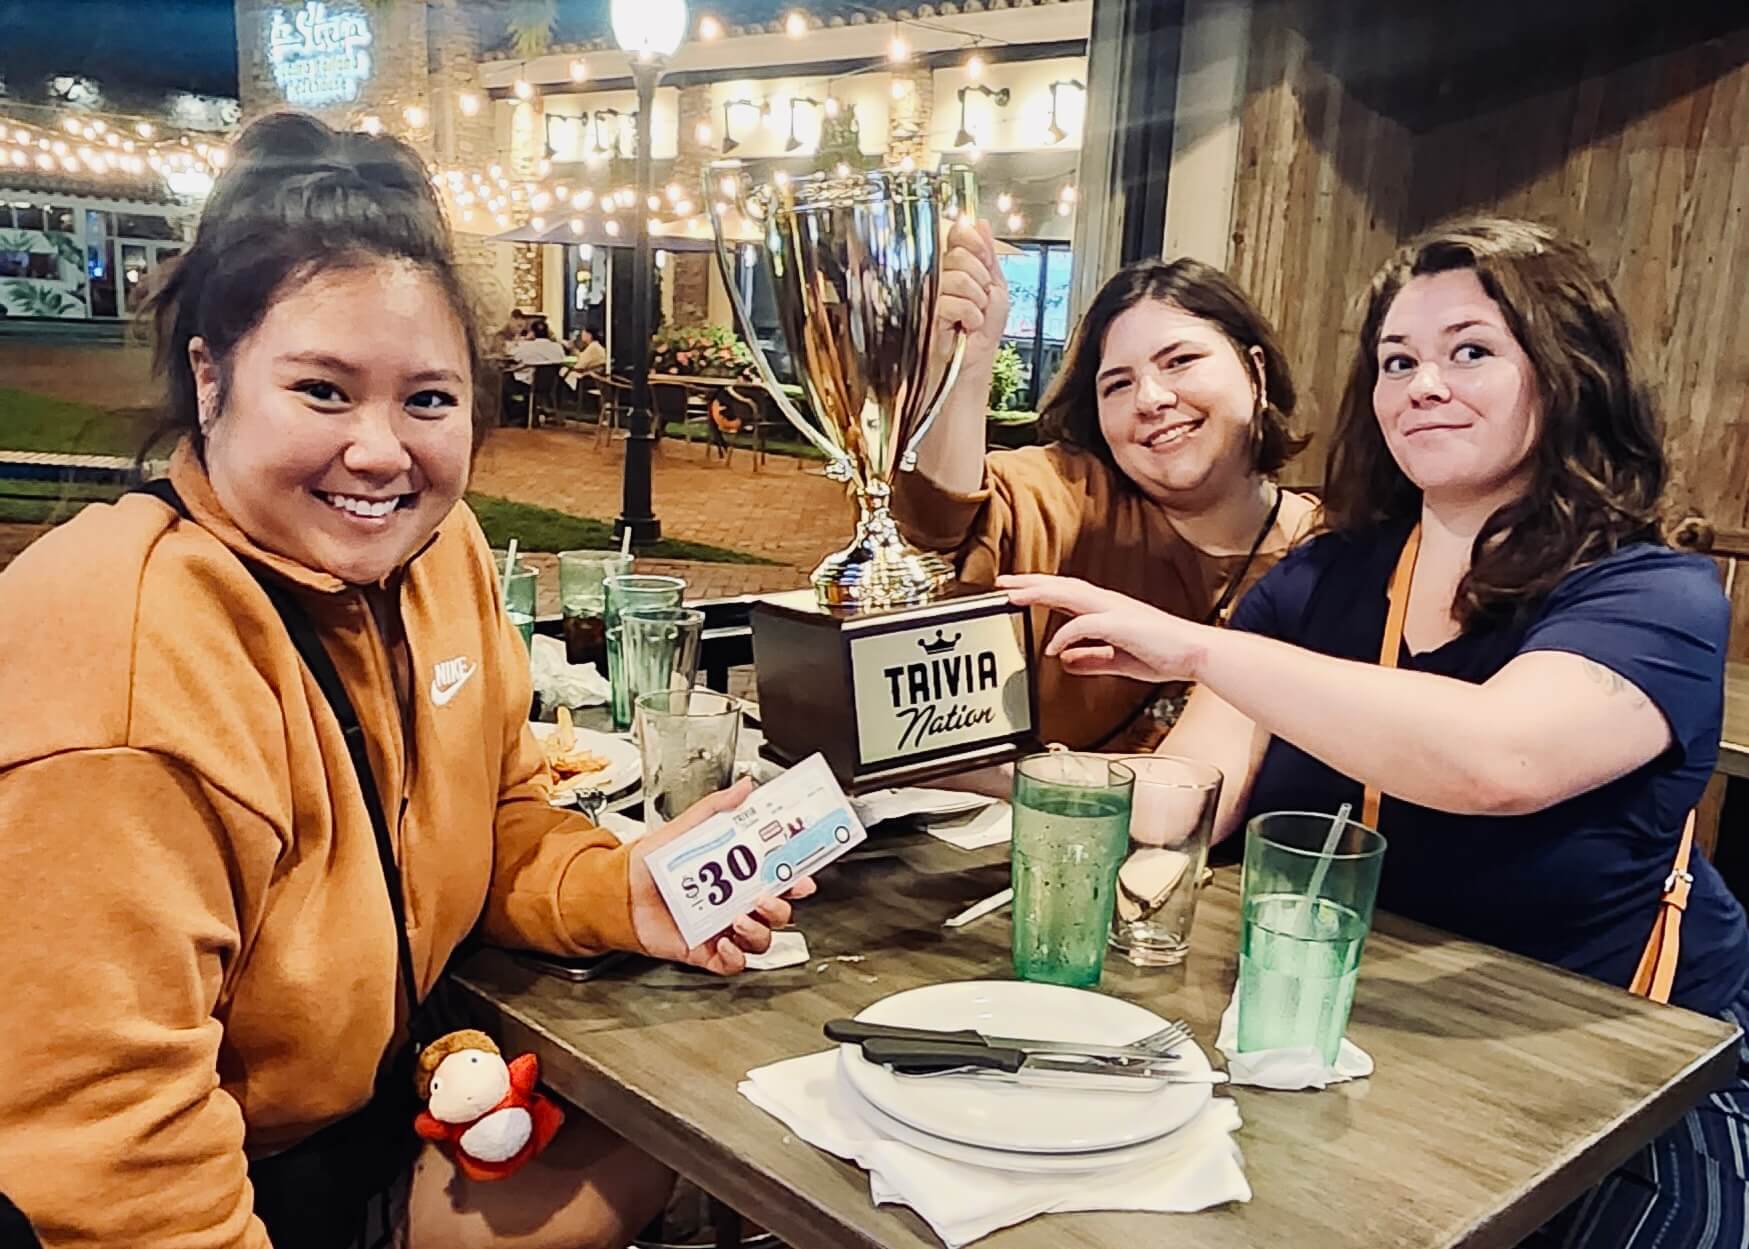 Miller's Ale House Miami Lakes FL 33014 trivia night: three young women seated at a table smiling while holding up a Trivia Nation trophy and coupon with a lit courtyard behind them in the background